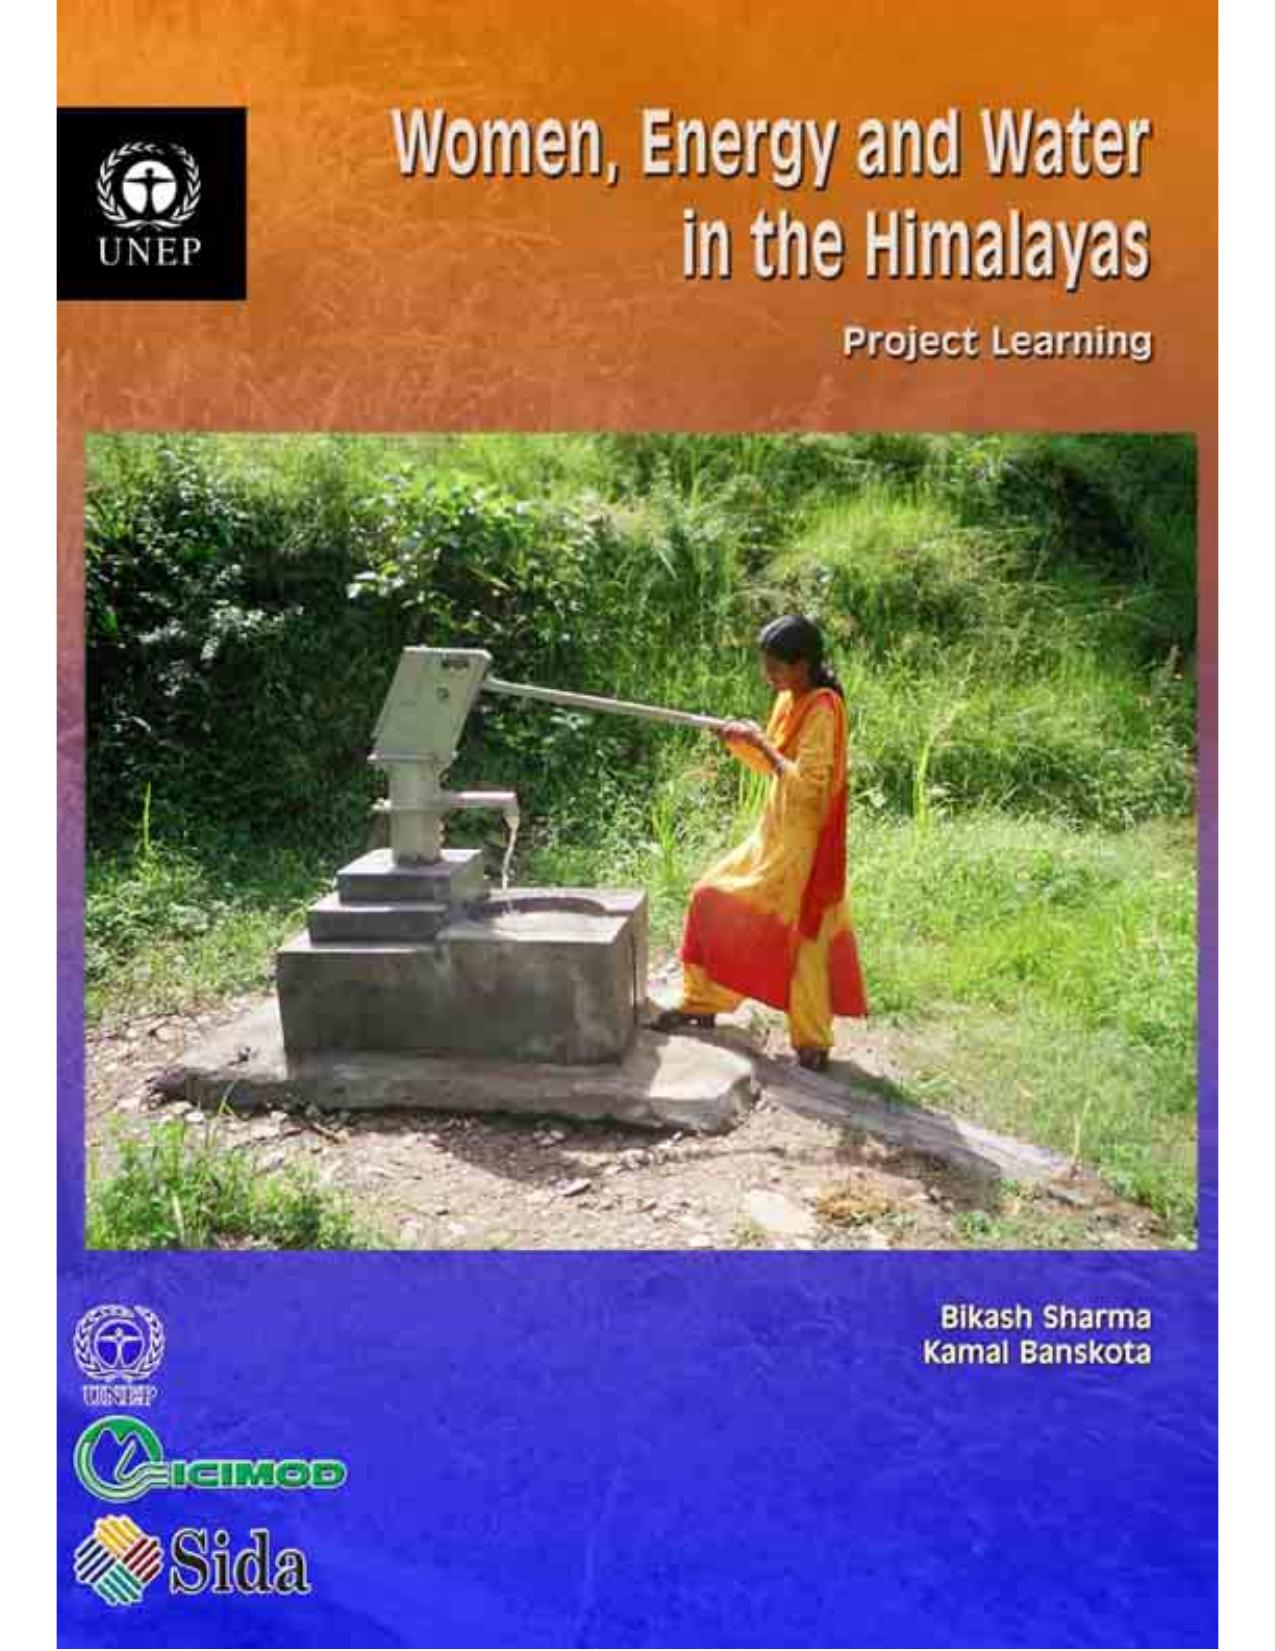 Women, Energy and Water in the Himalayas: Project Learning